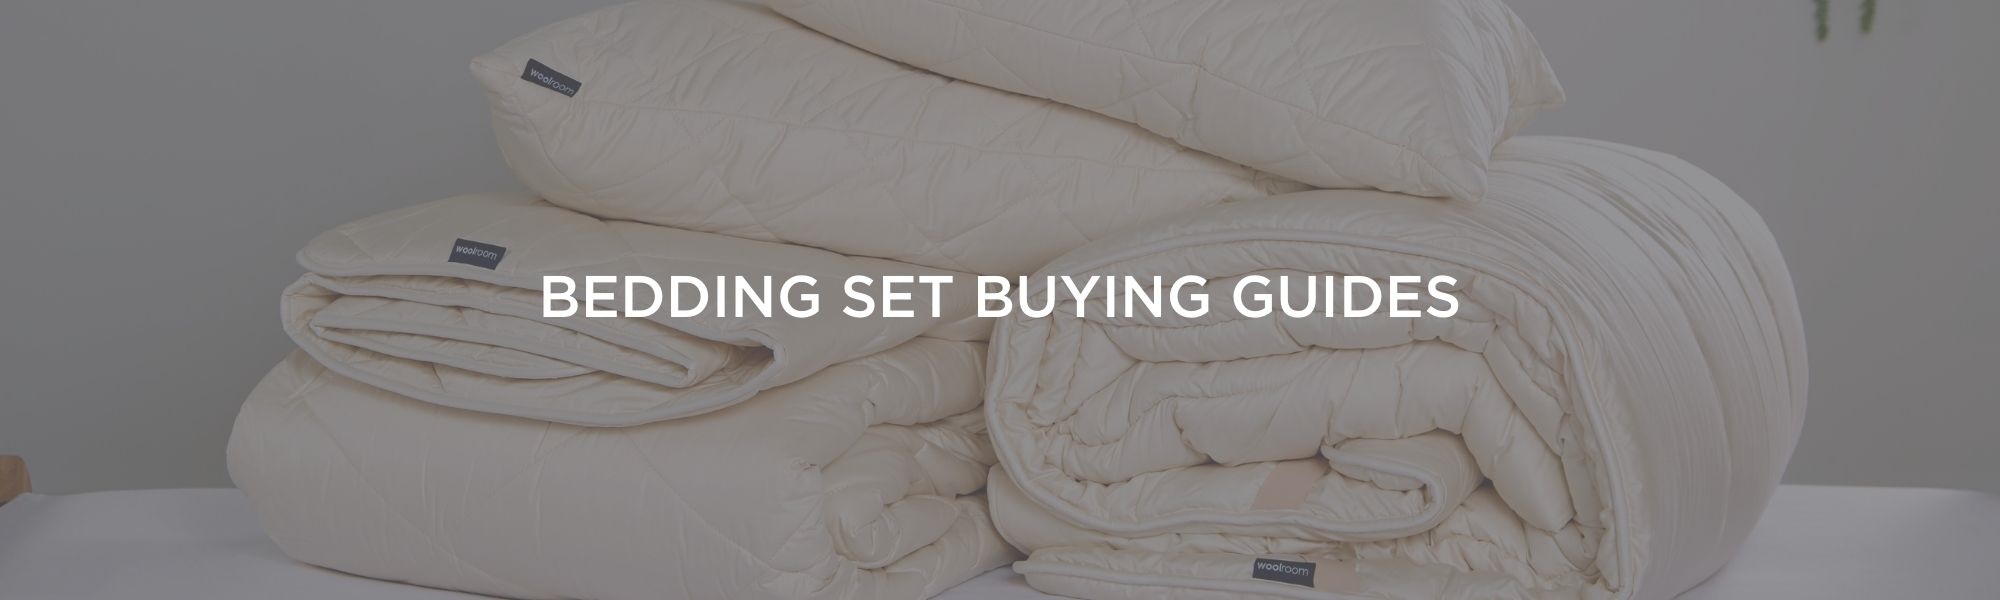 Bedding set collection buying guides